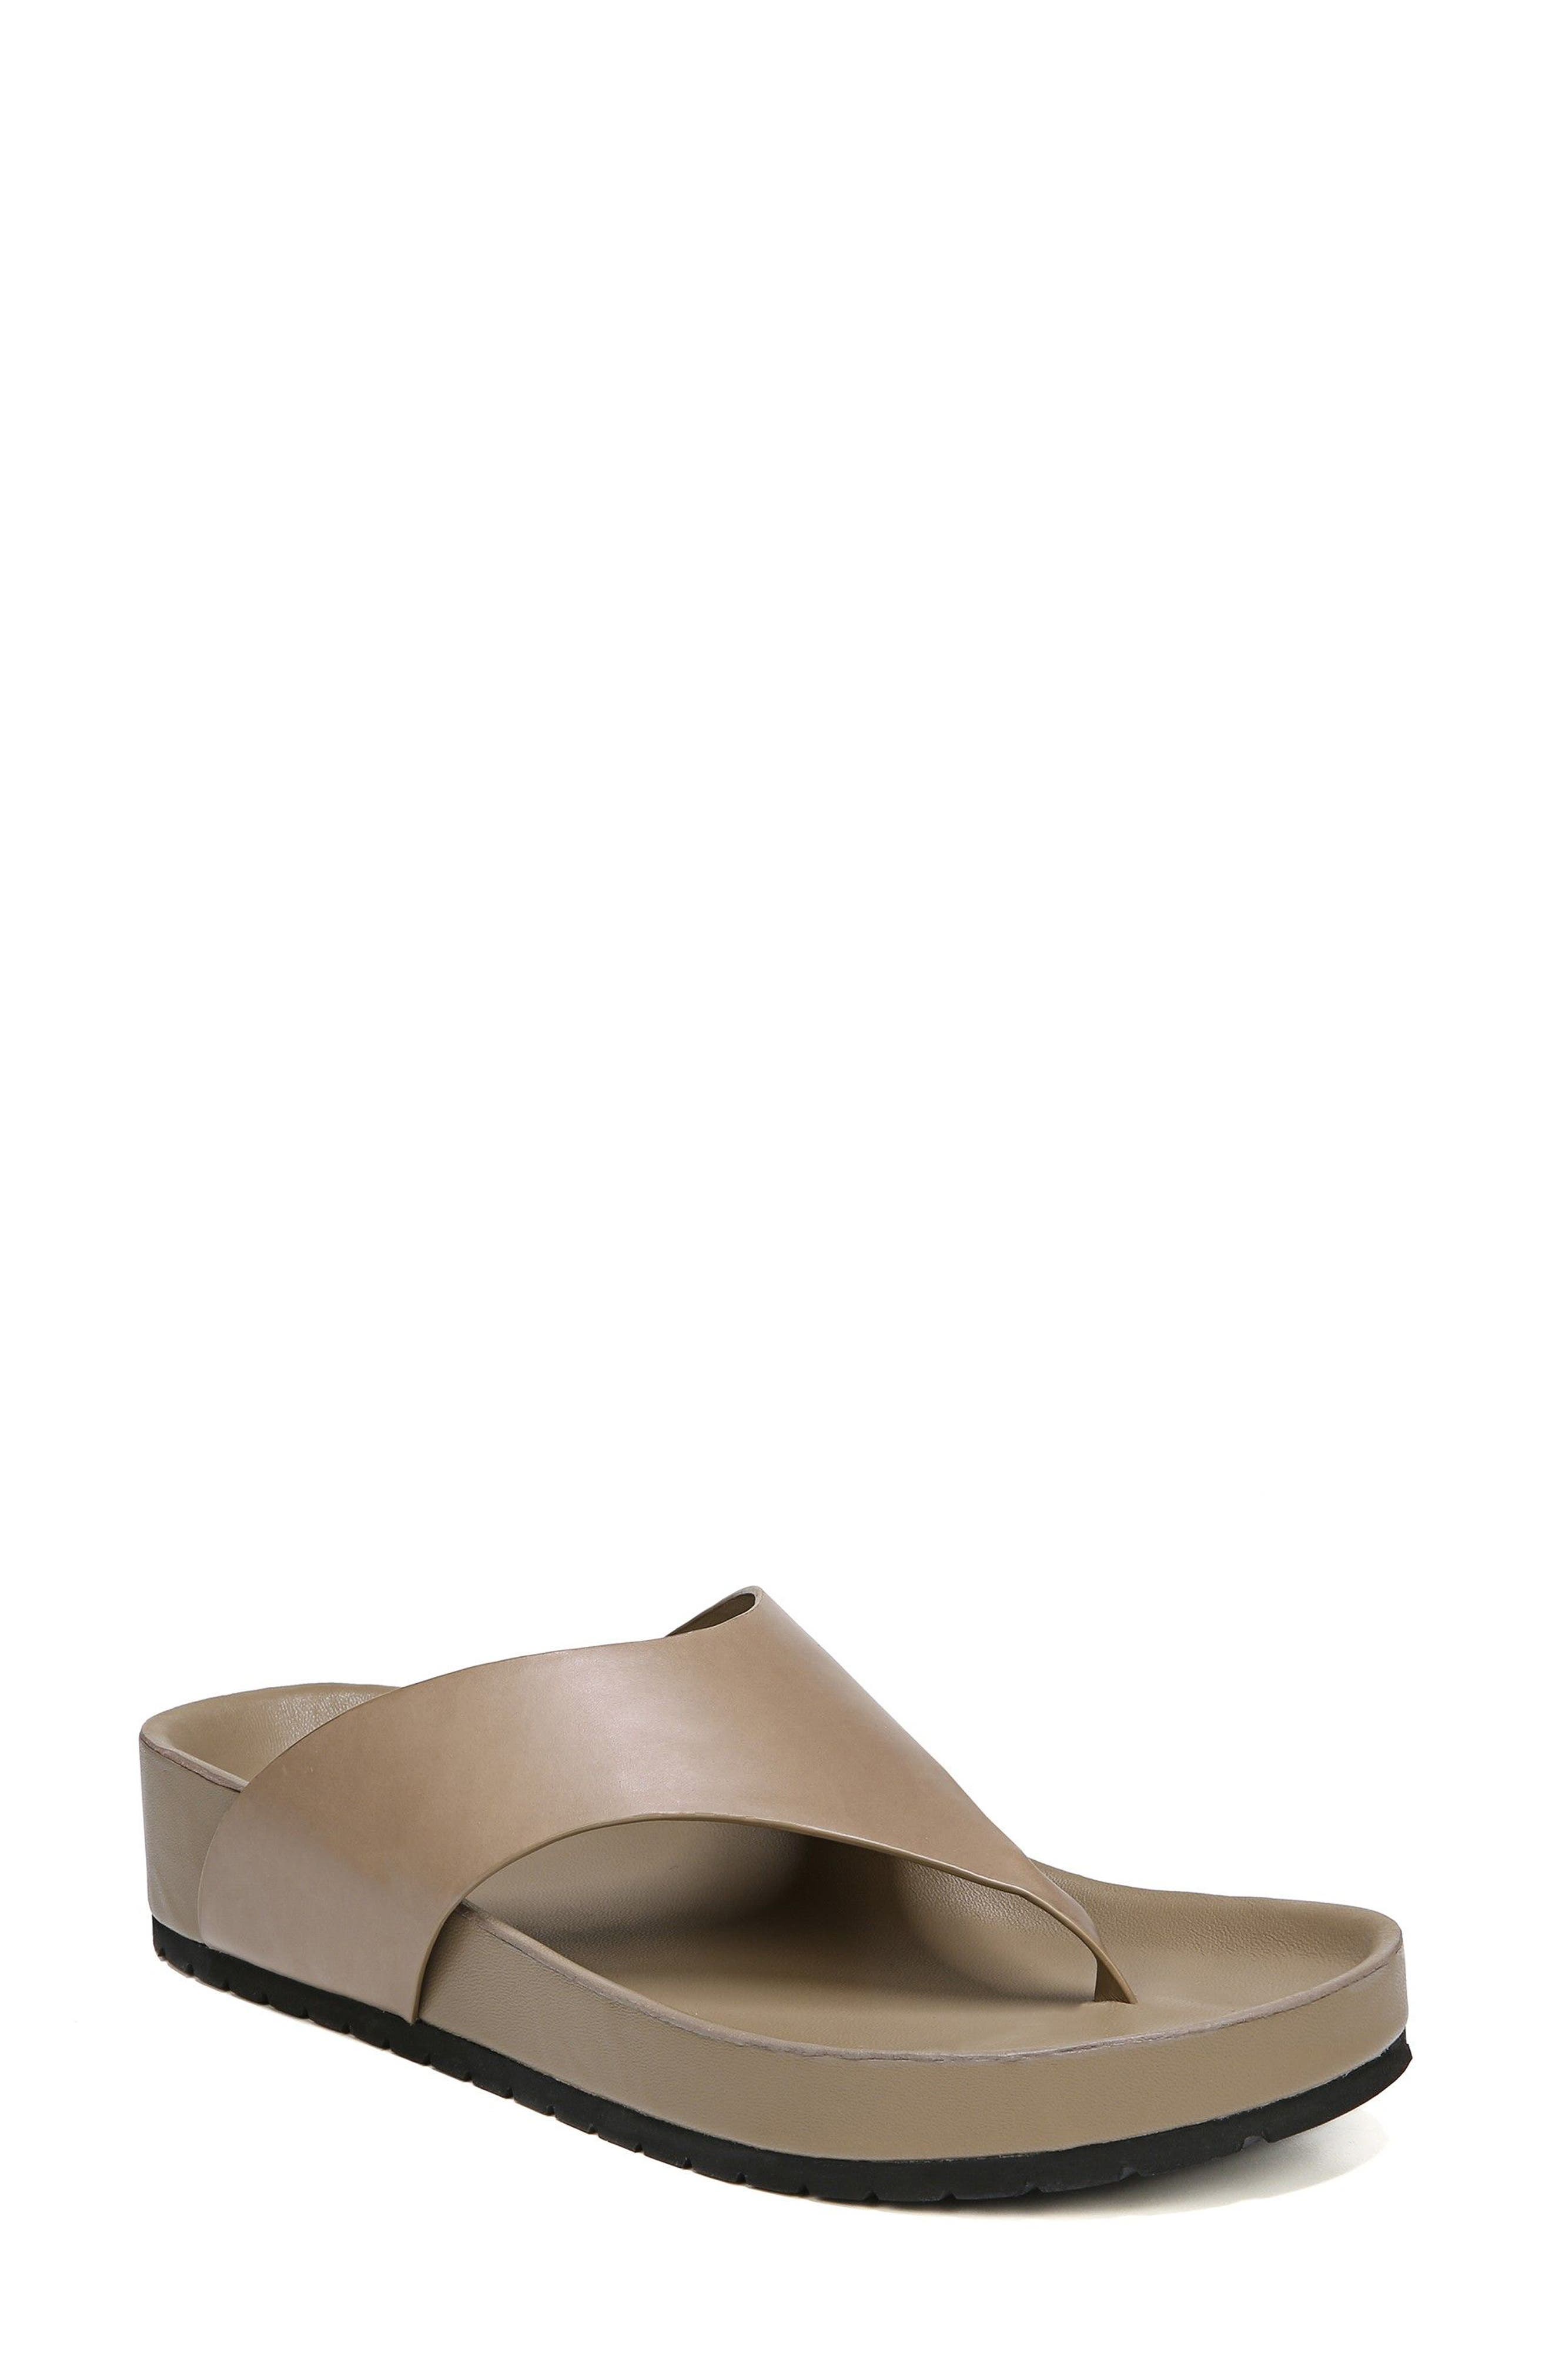 Padma Leather Thong Sandals 